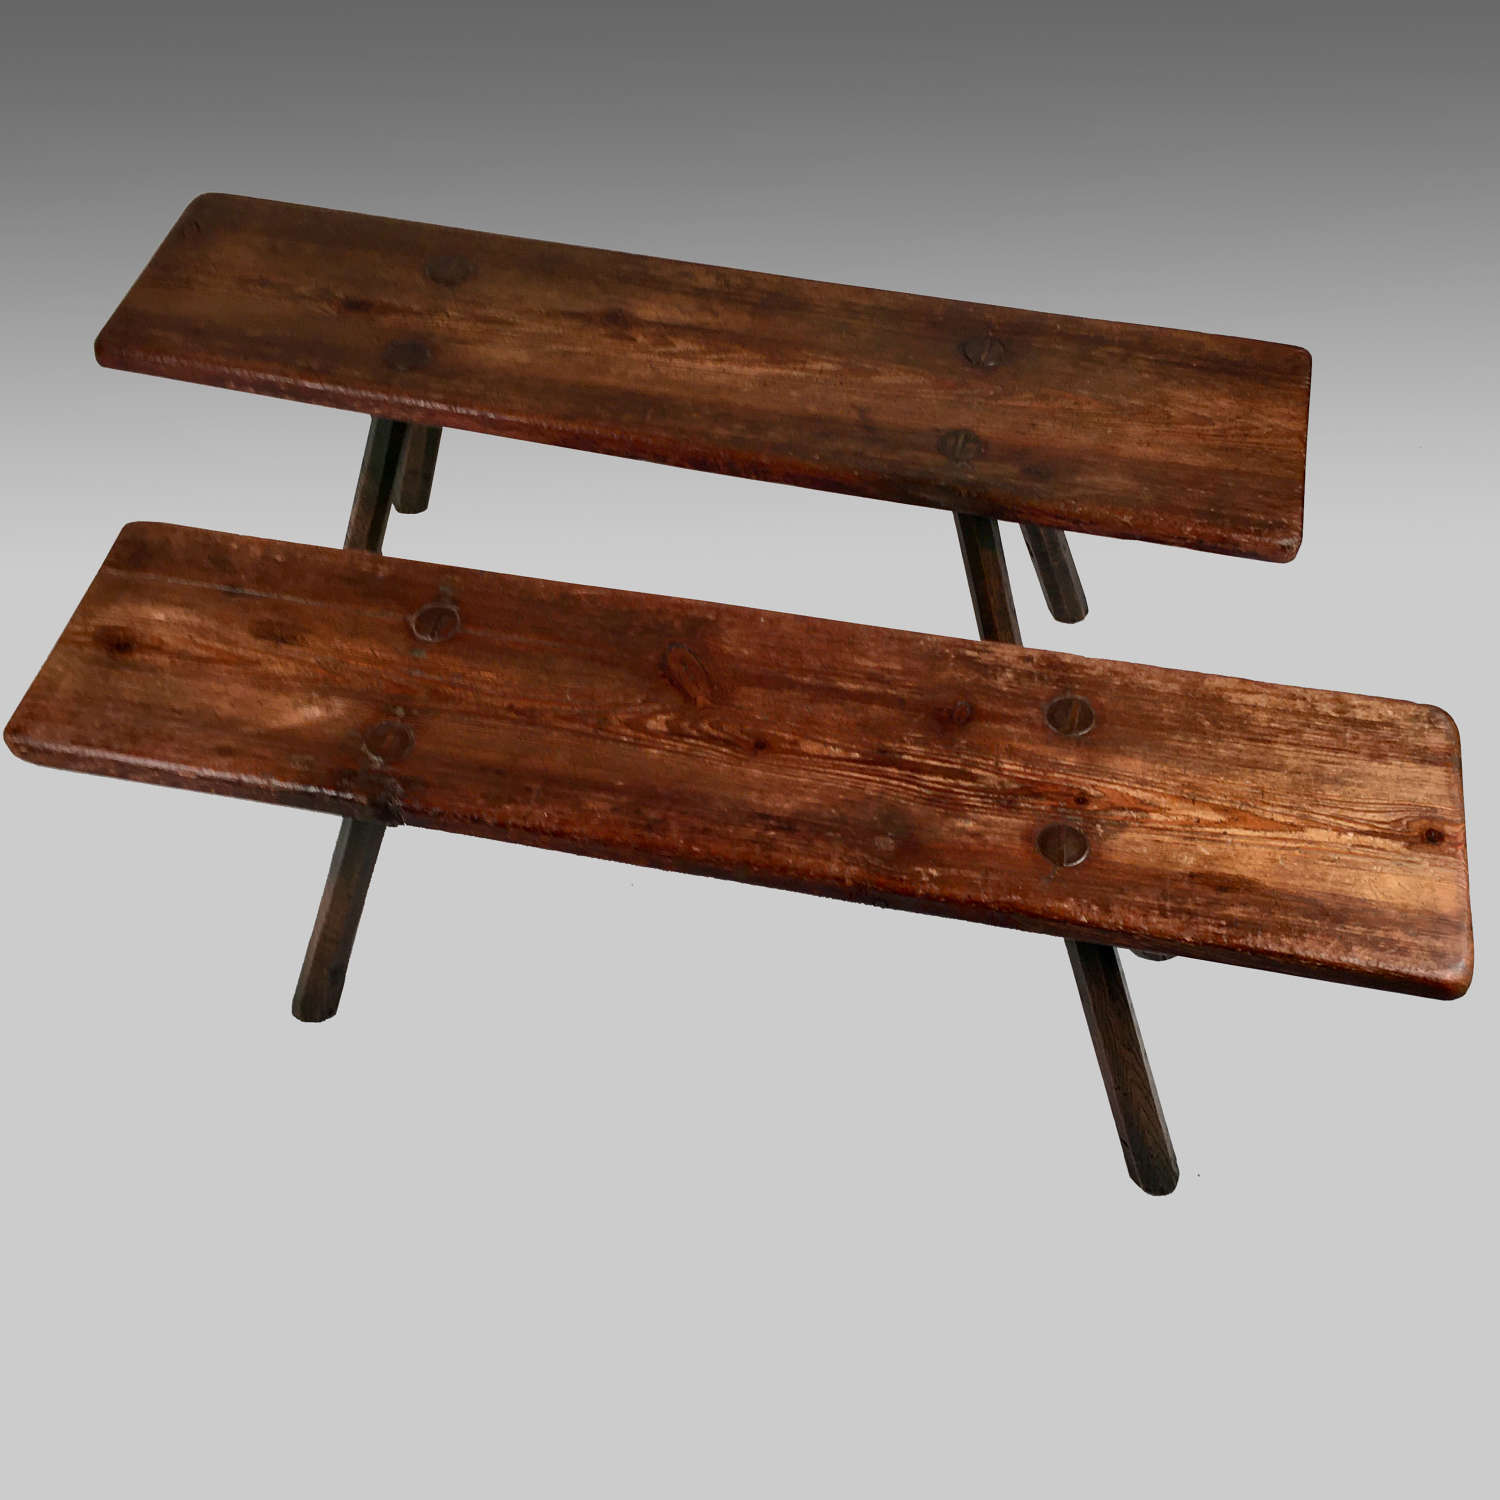 Two rustic oak and pine benches